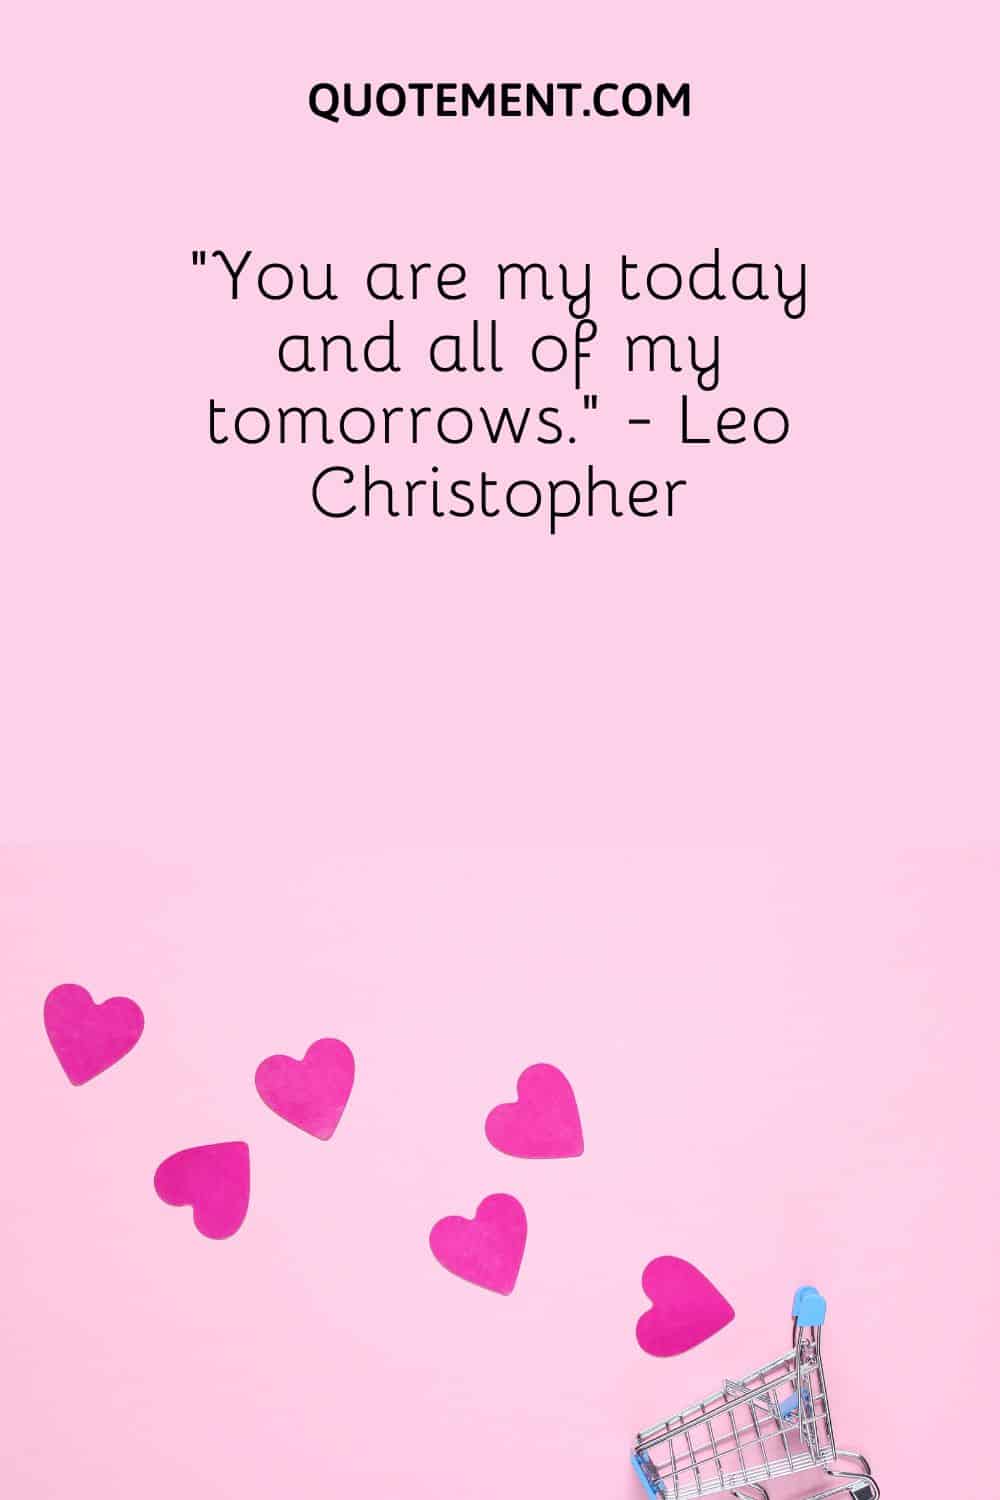 “You are my today and all of my tomorrows.” - Leo Christopher